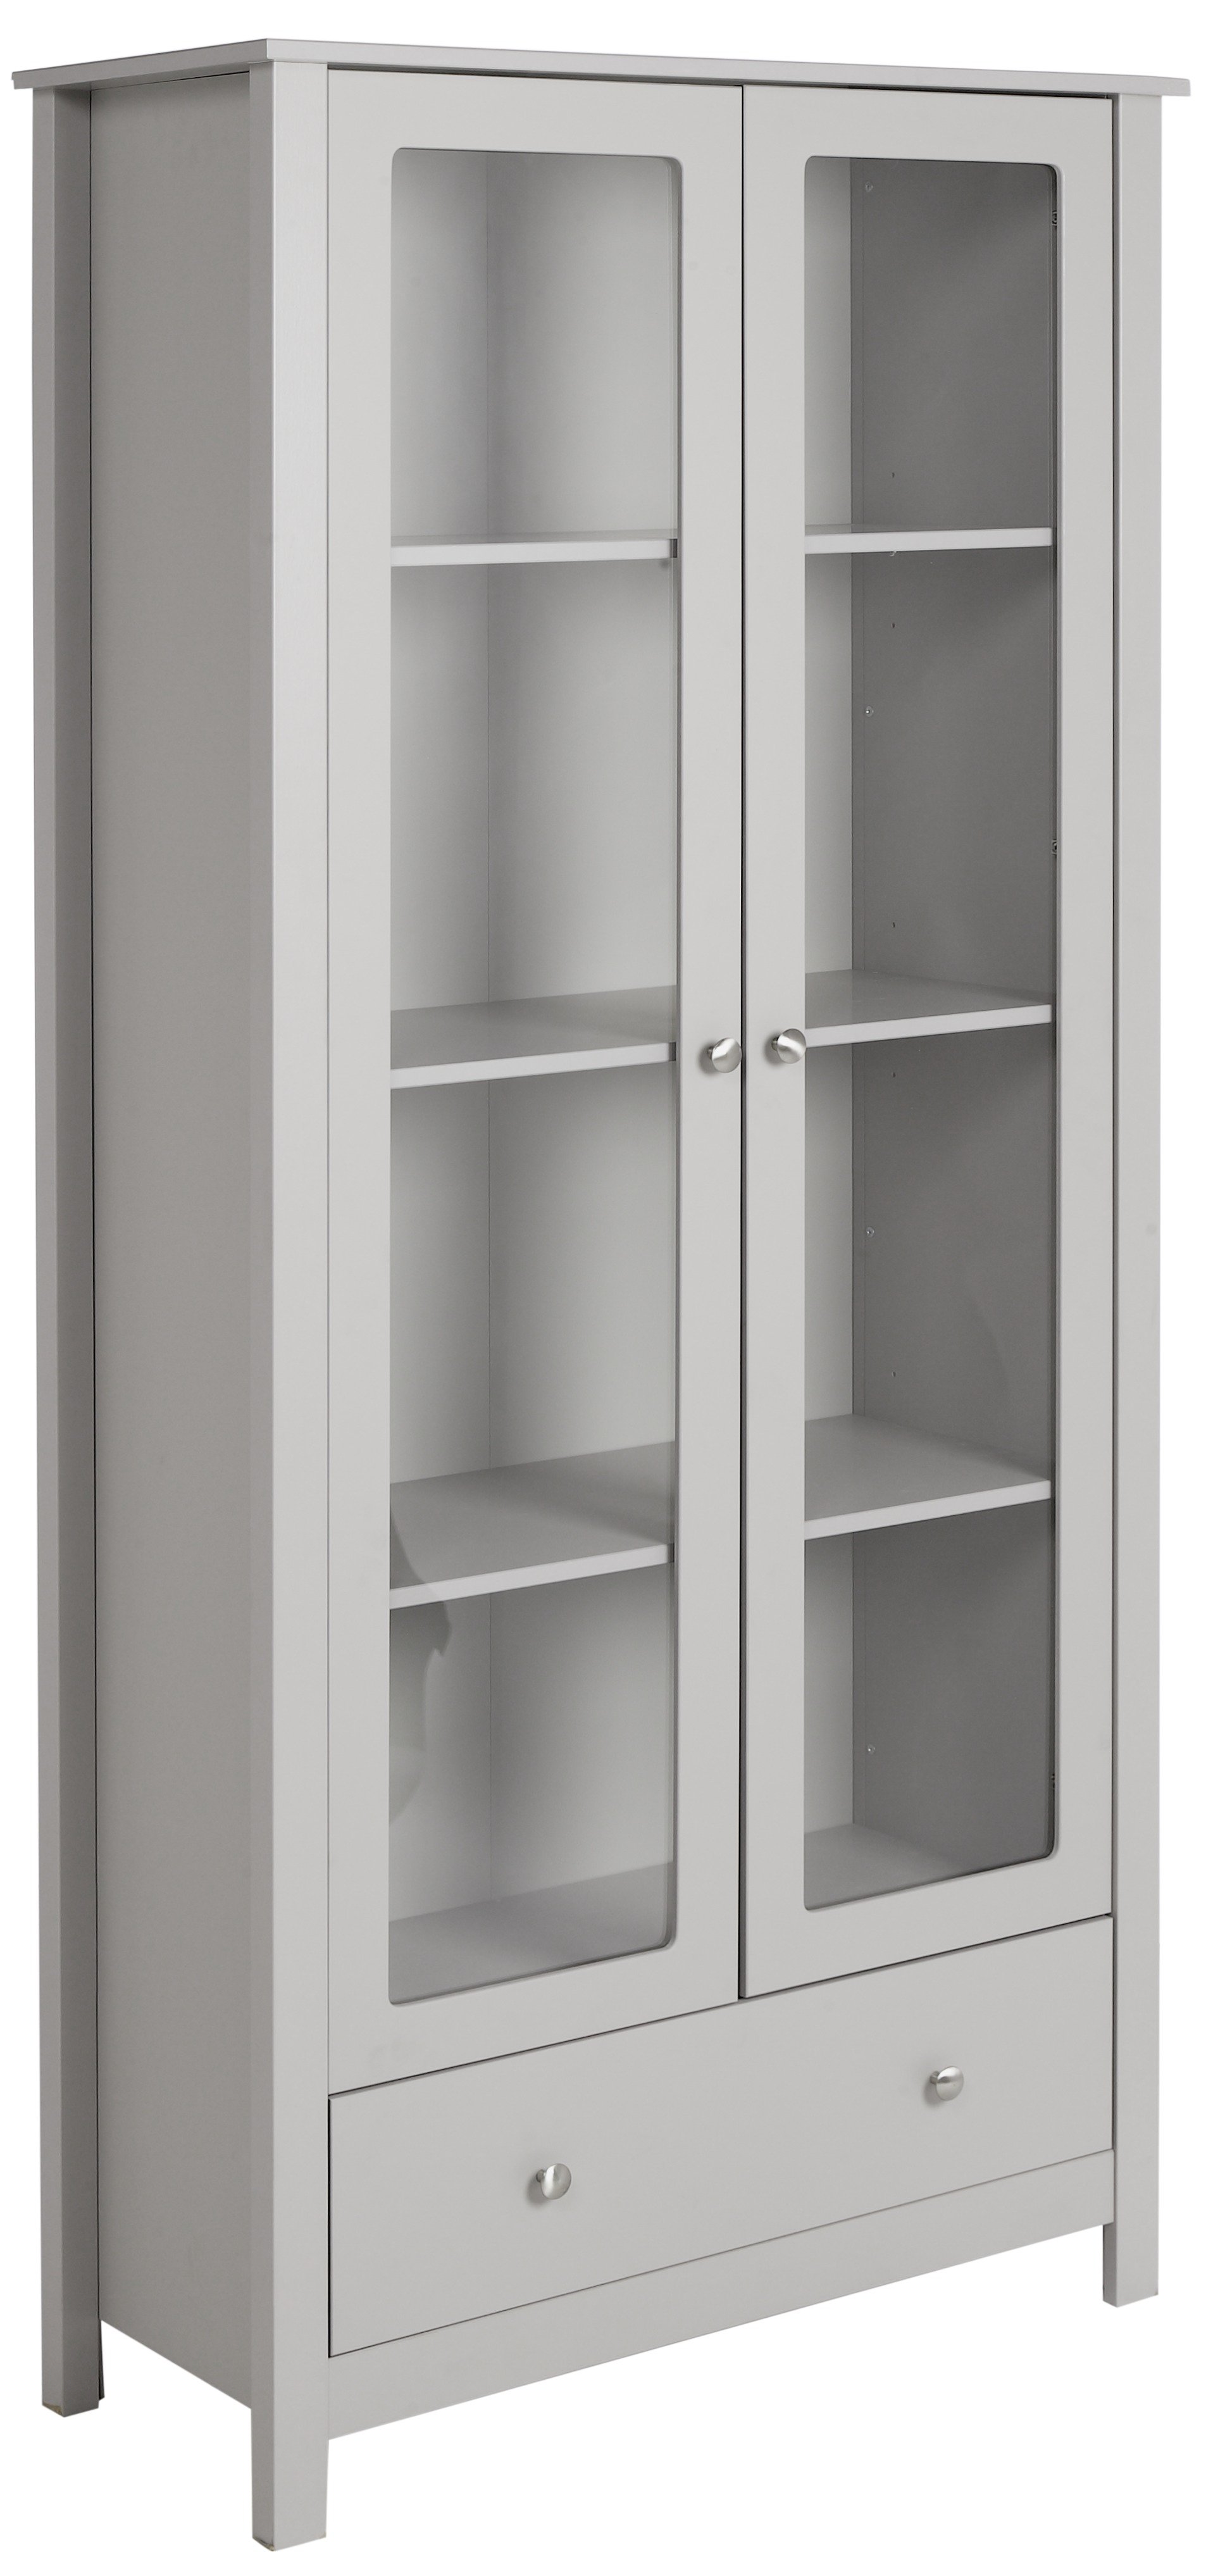 Display Cabinets And Glass Cabinets Page 1 Argos Price Tracker